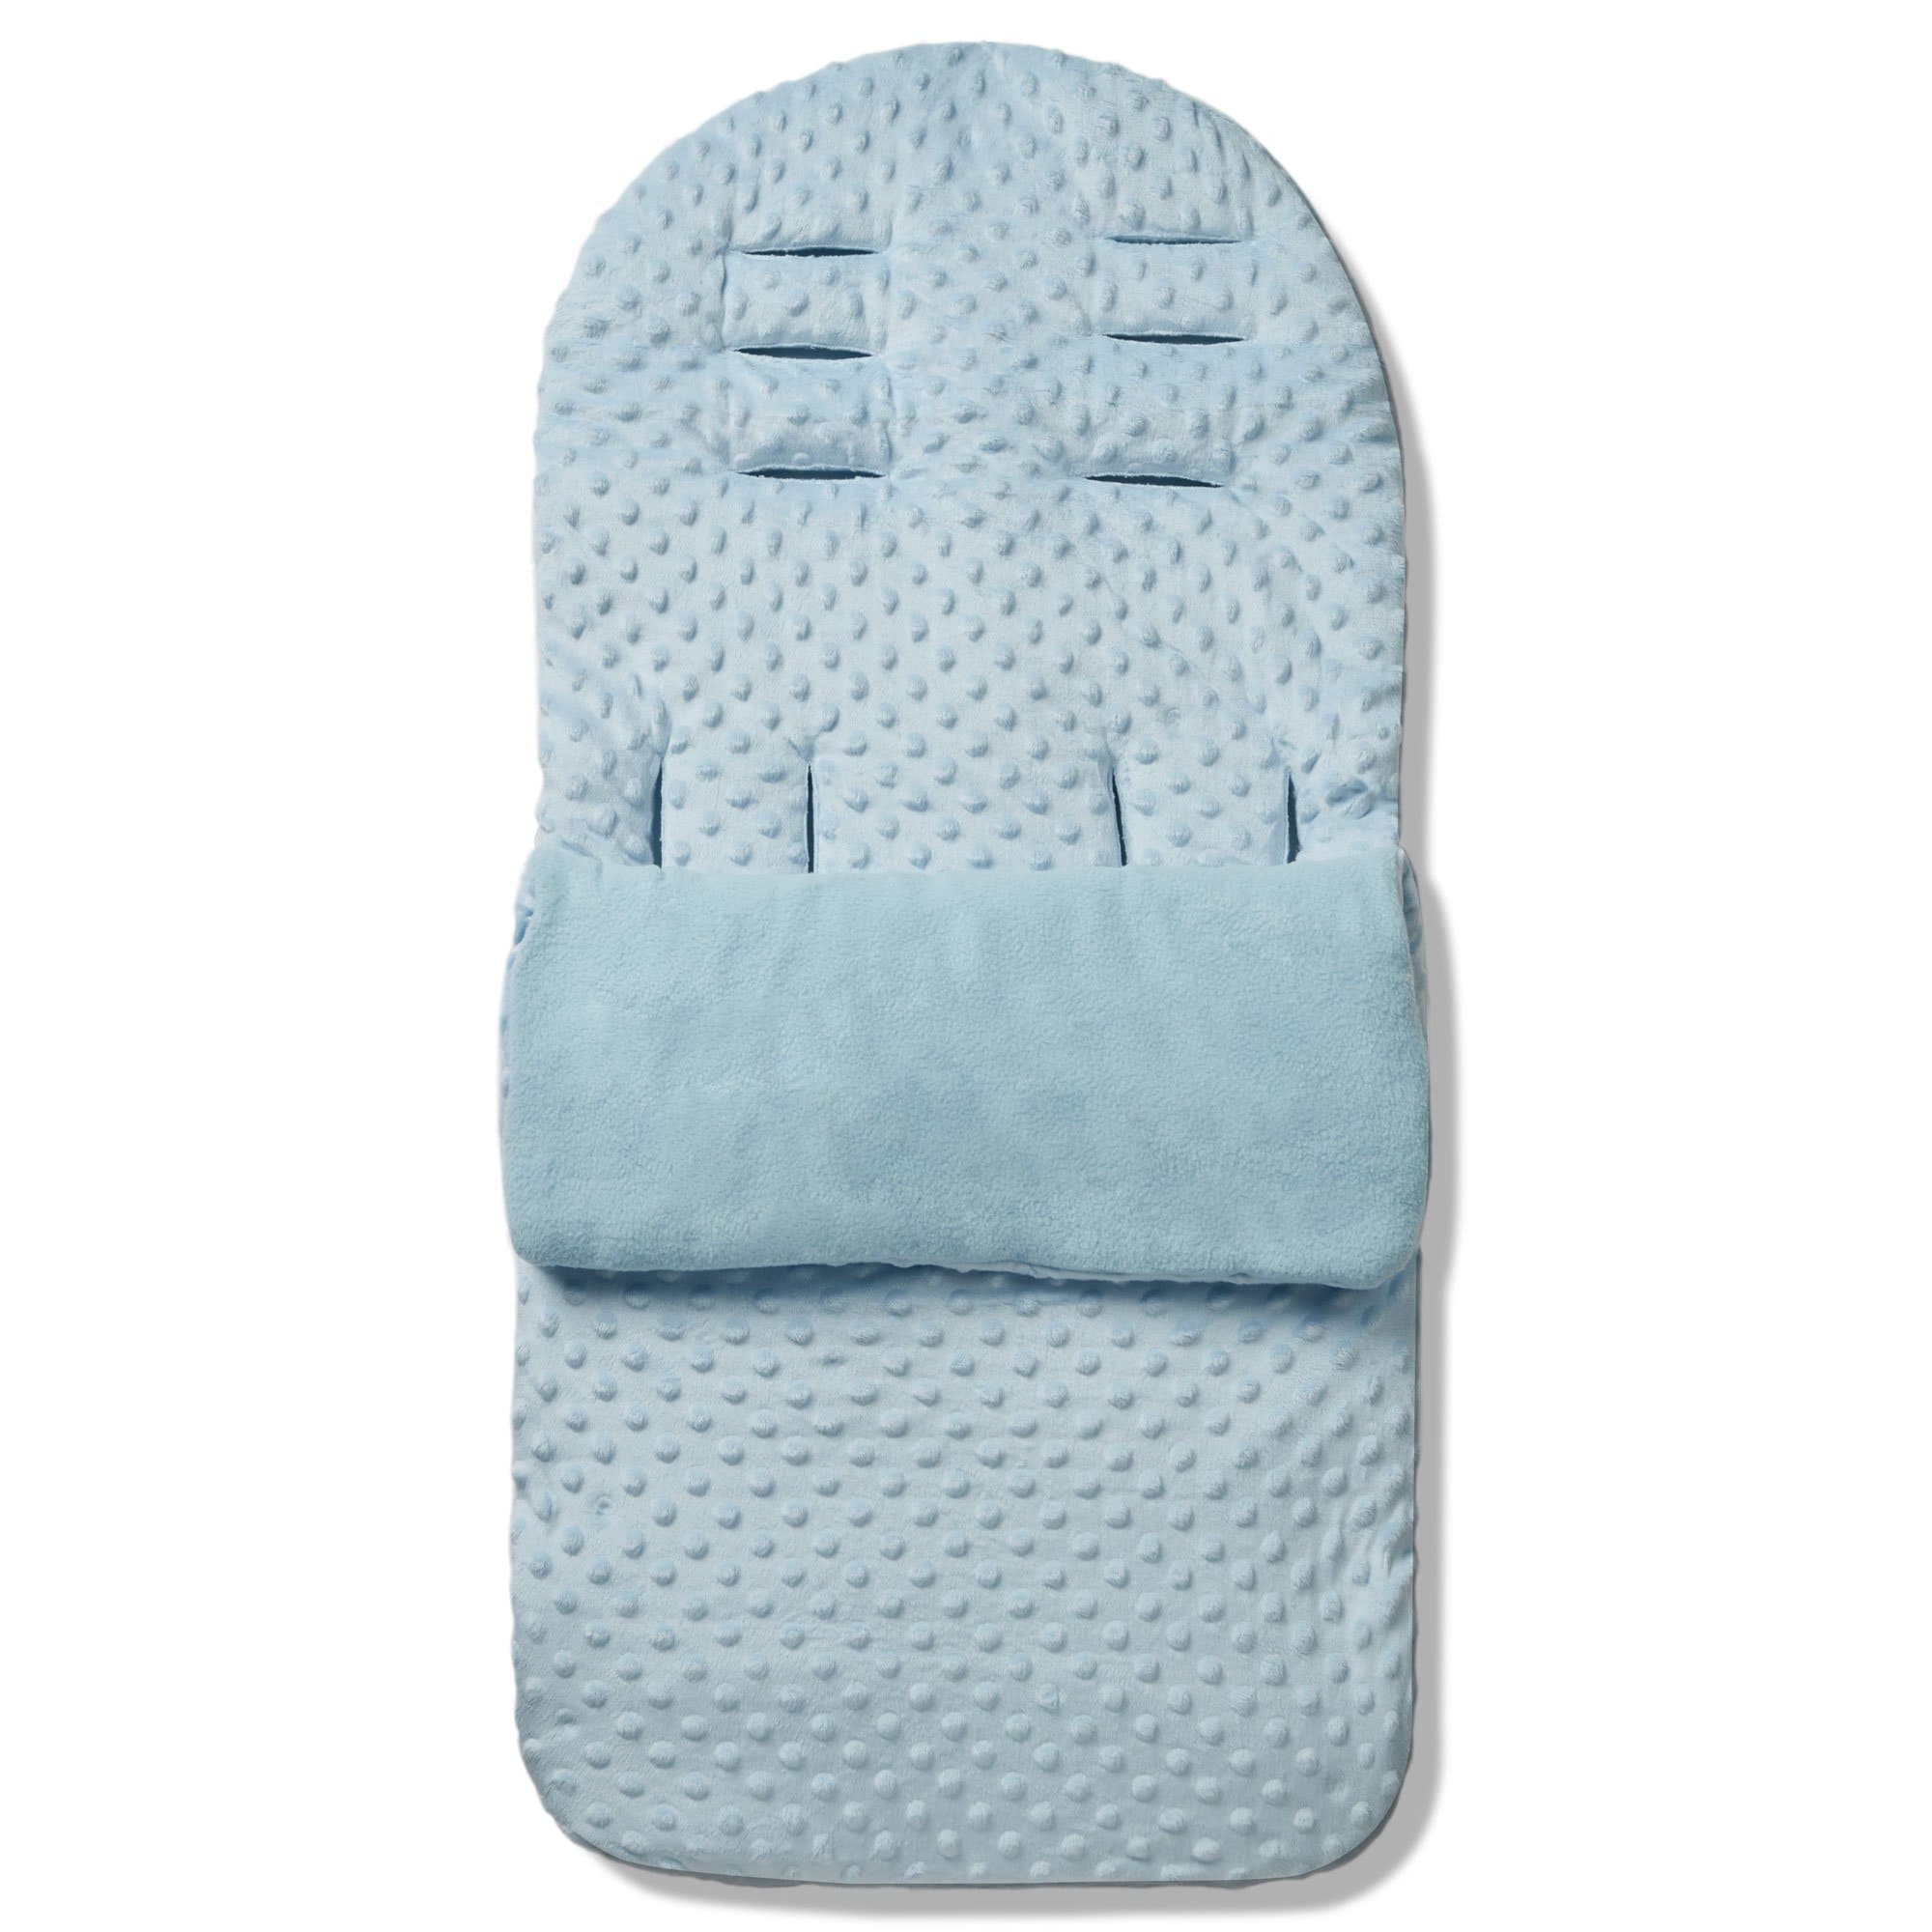 Dimple Footmuff / Cosy Toes Compatible with Bebecar - For Your Little One